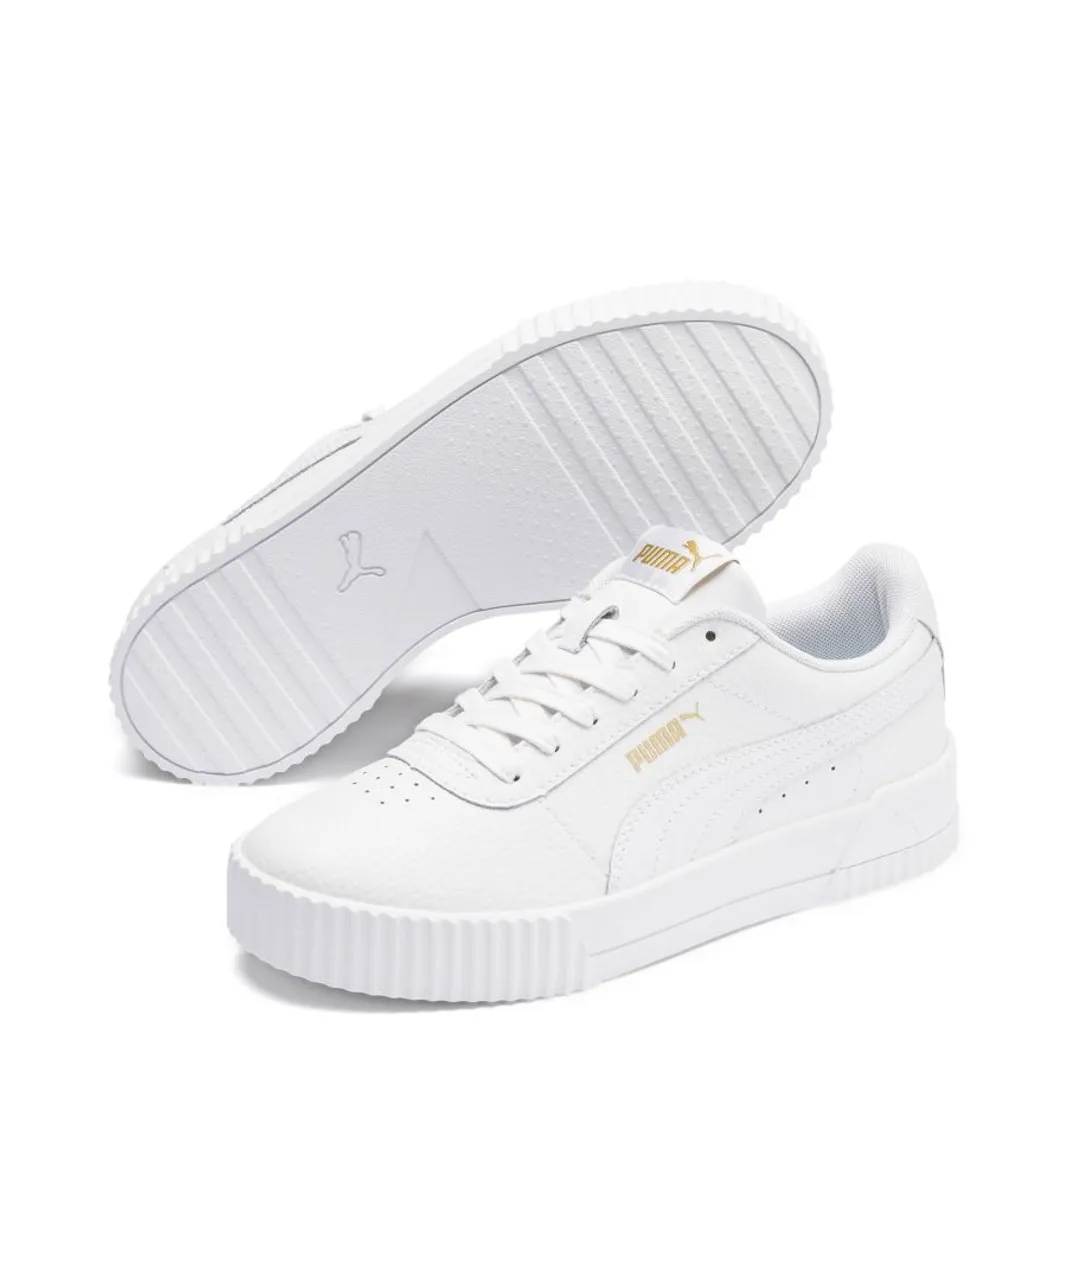 Puma Womens Carina Lux Trainers Sports Shoes - White Leather